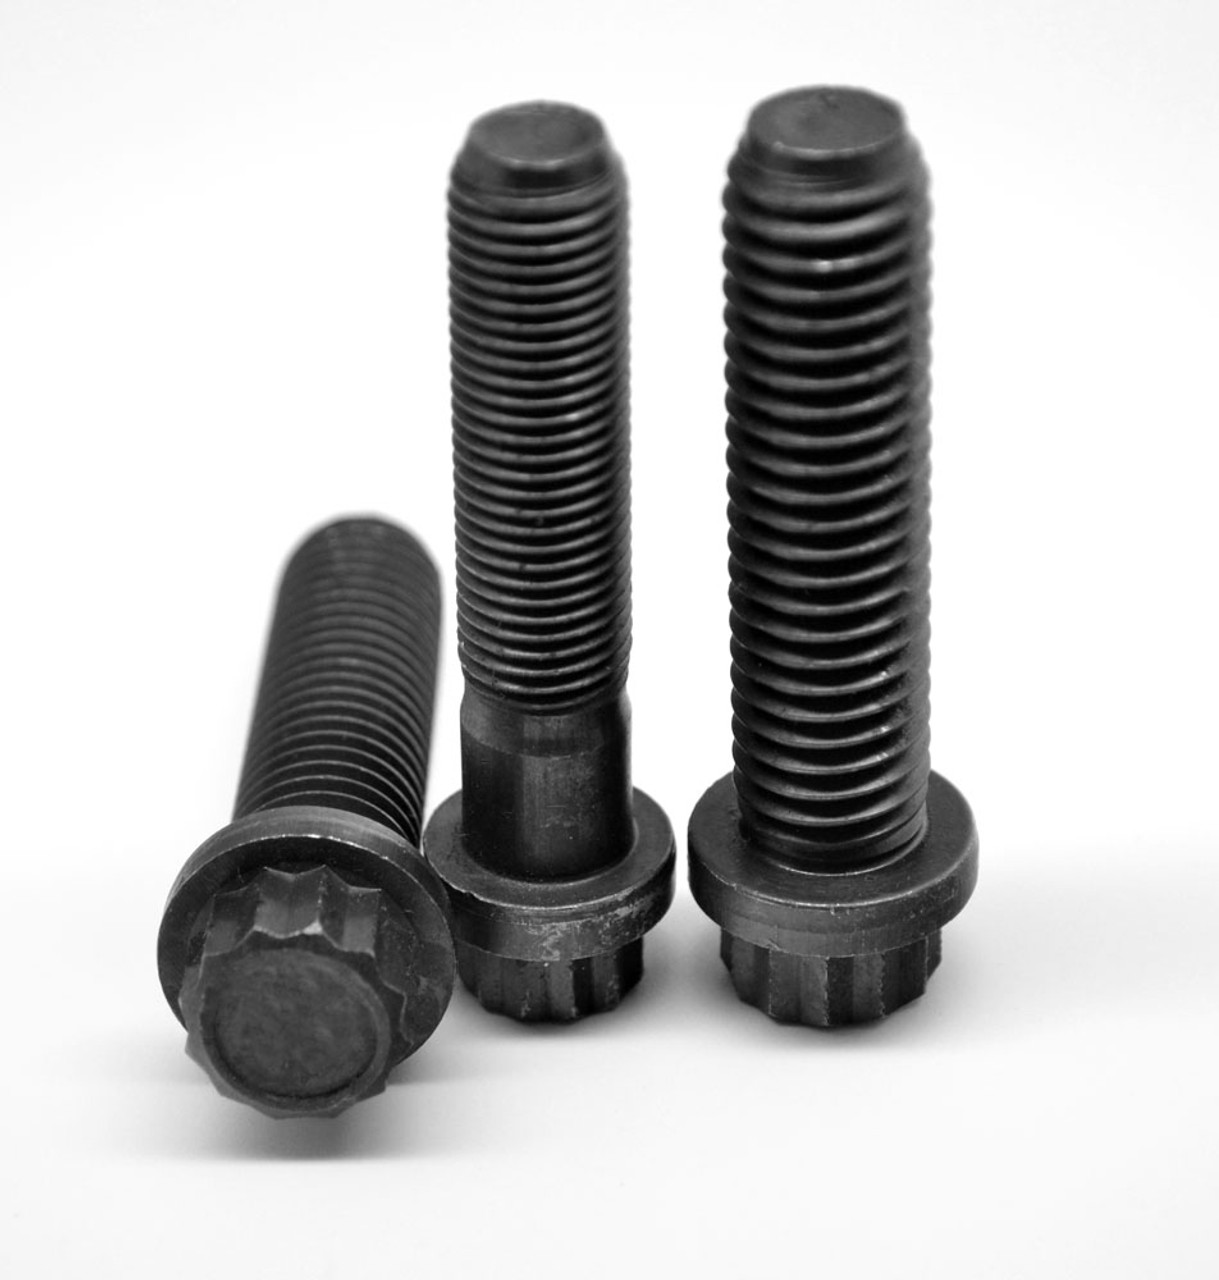 1/4-20 x 3 Coarse Thread 12-Point Flange Screw Alloy Steel Thermal Black Oxide